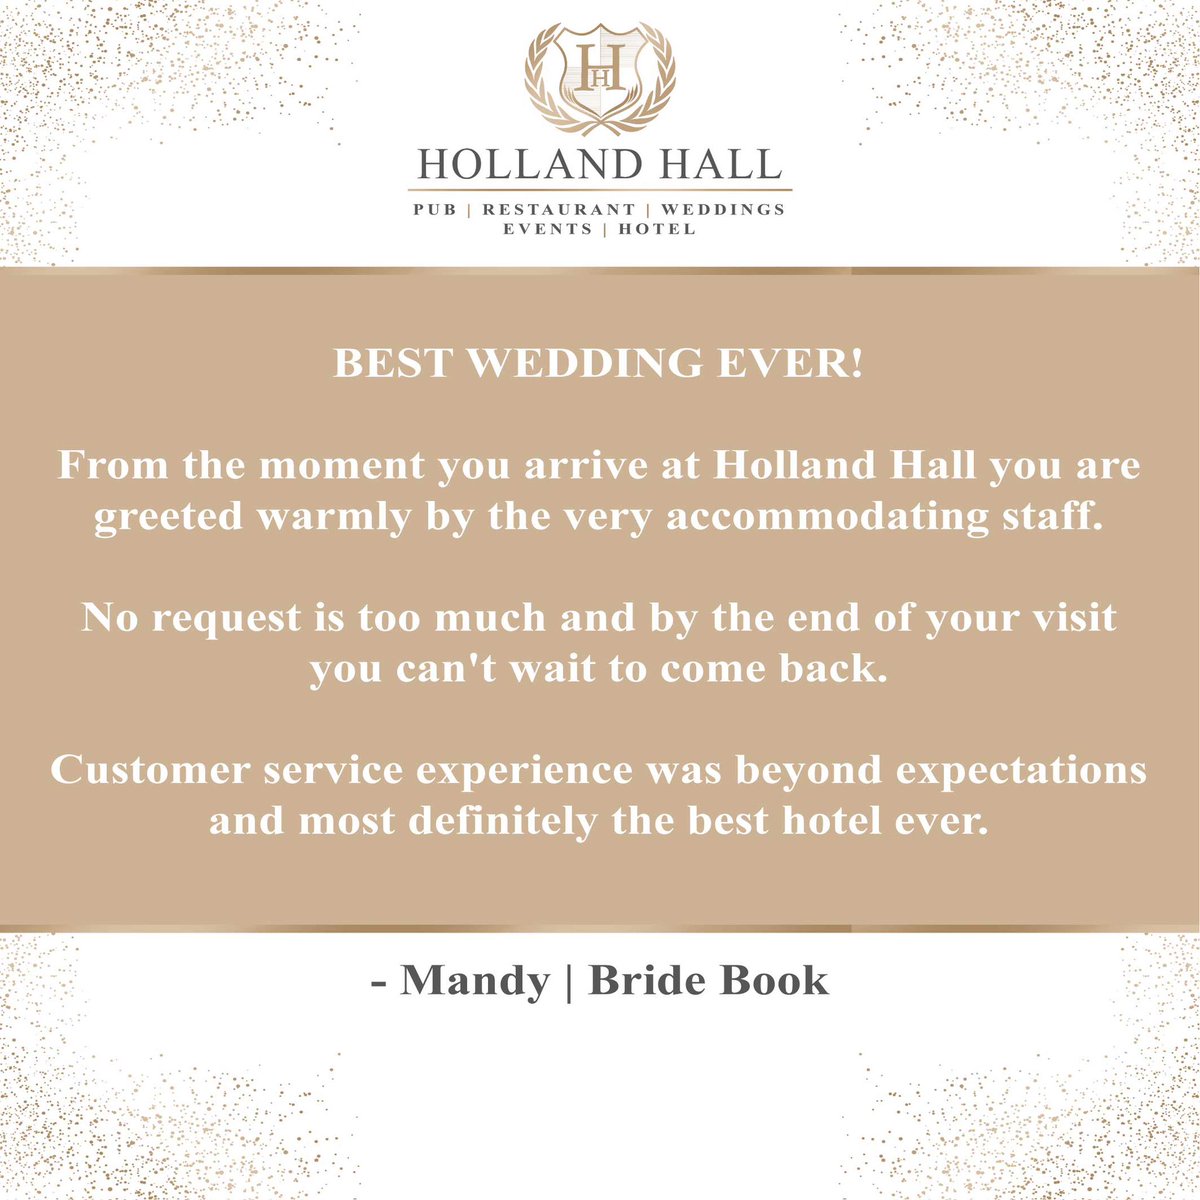 ⭐️ BEST WEDDING EVER! ⭐️

Thank you so much Mandy for your absolutely amazing review, we really appreciate it ! Holland Hall Team. 💗❤️🫶🏼

#ThankYou #GreatReview #GreatFood #GreatService #GreatVenue #wearehollandhall